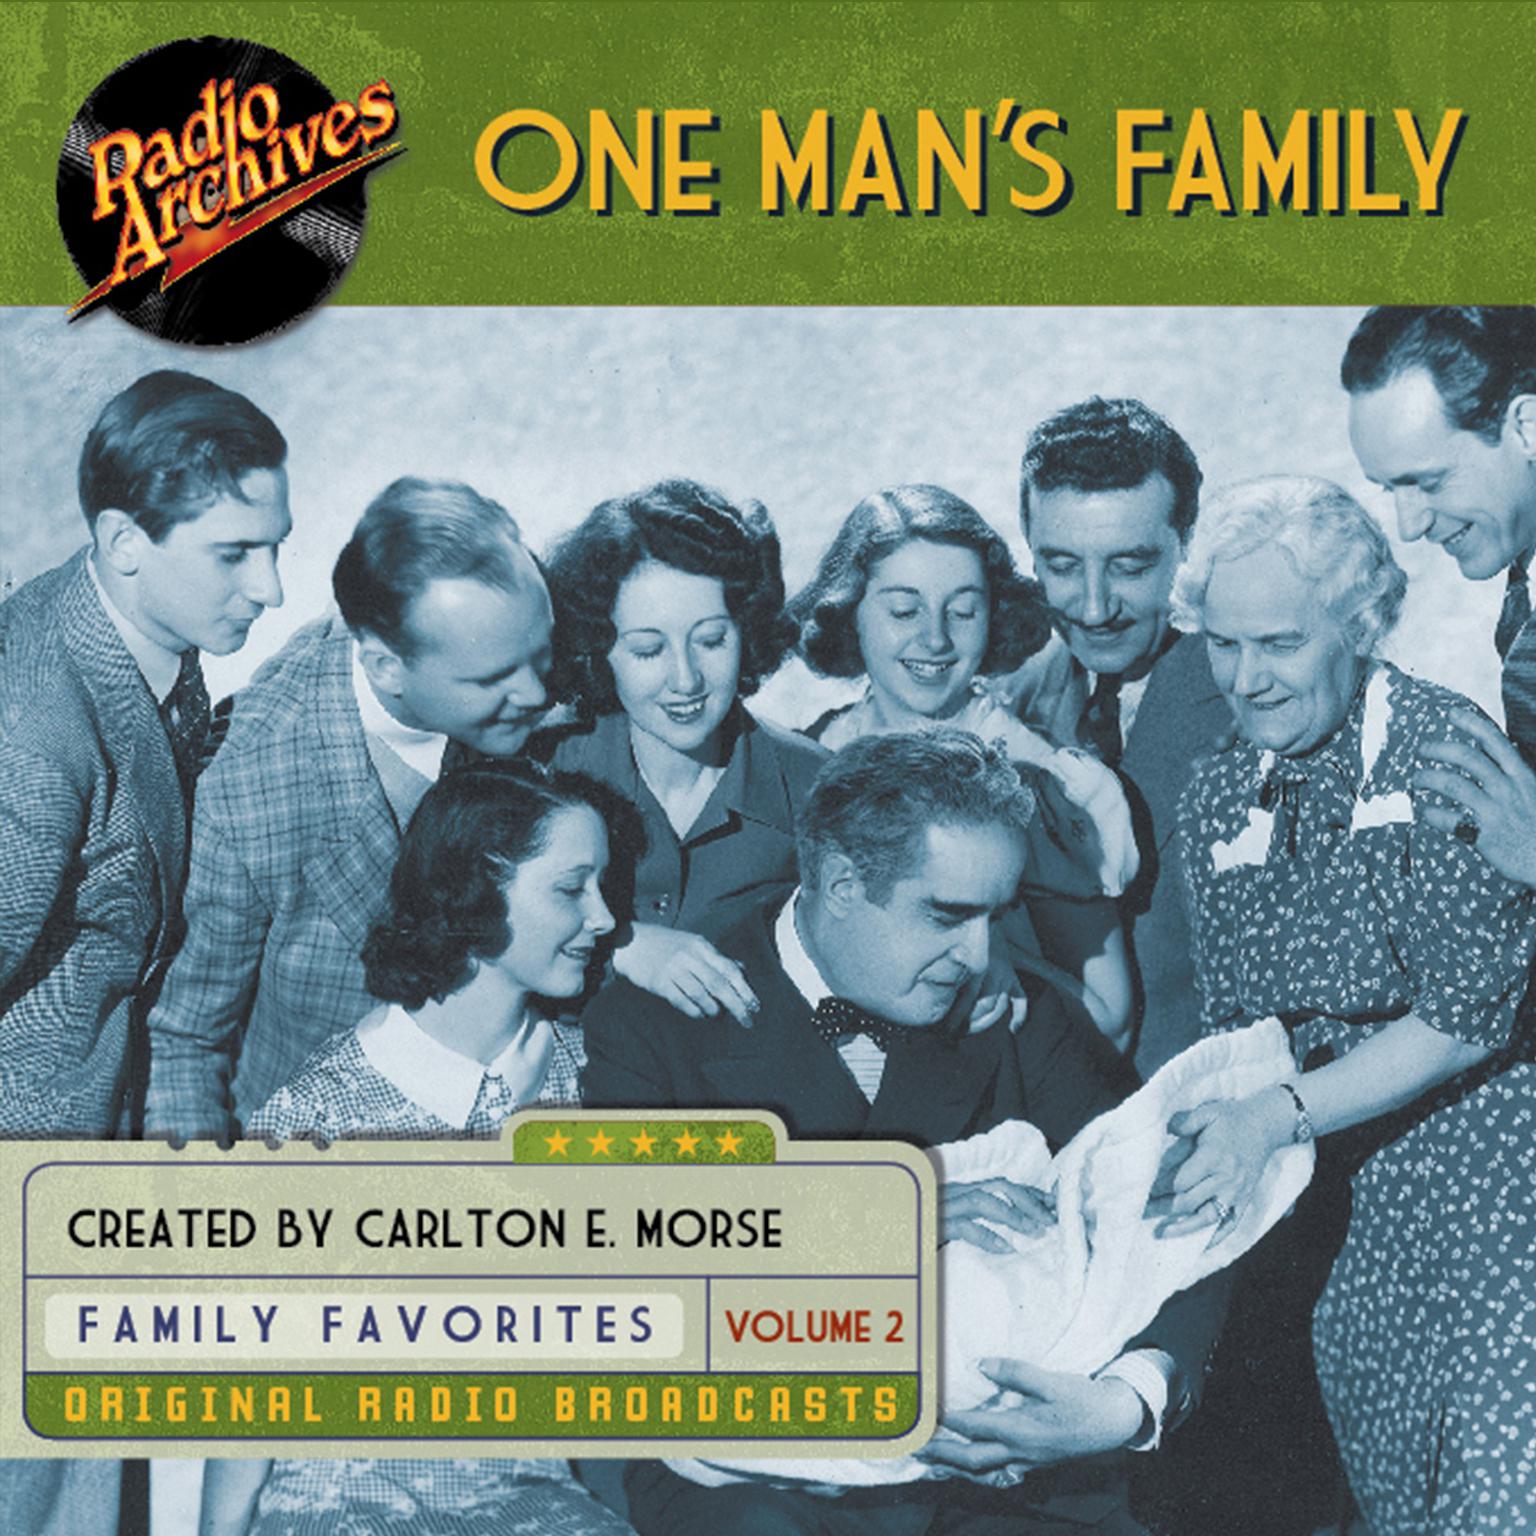 One Mans Family, Volume 2 Audiobook, by various authors